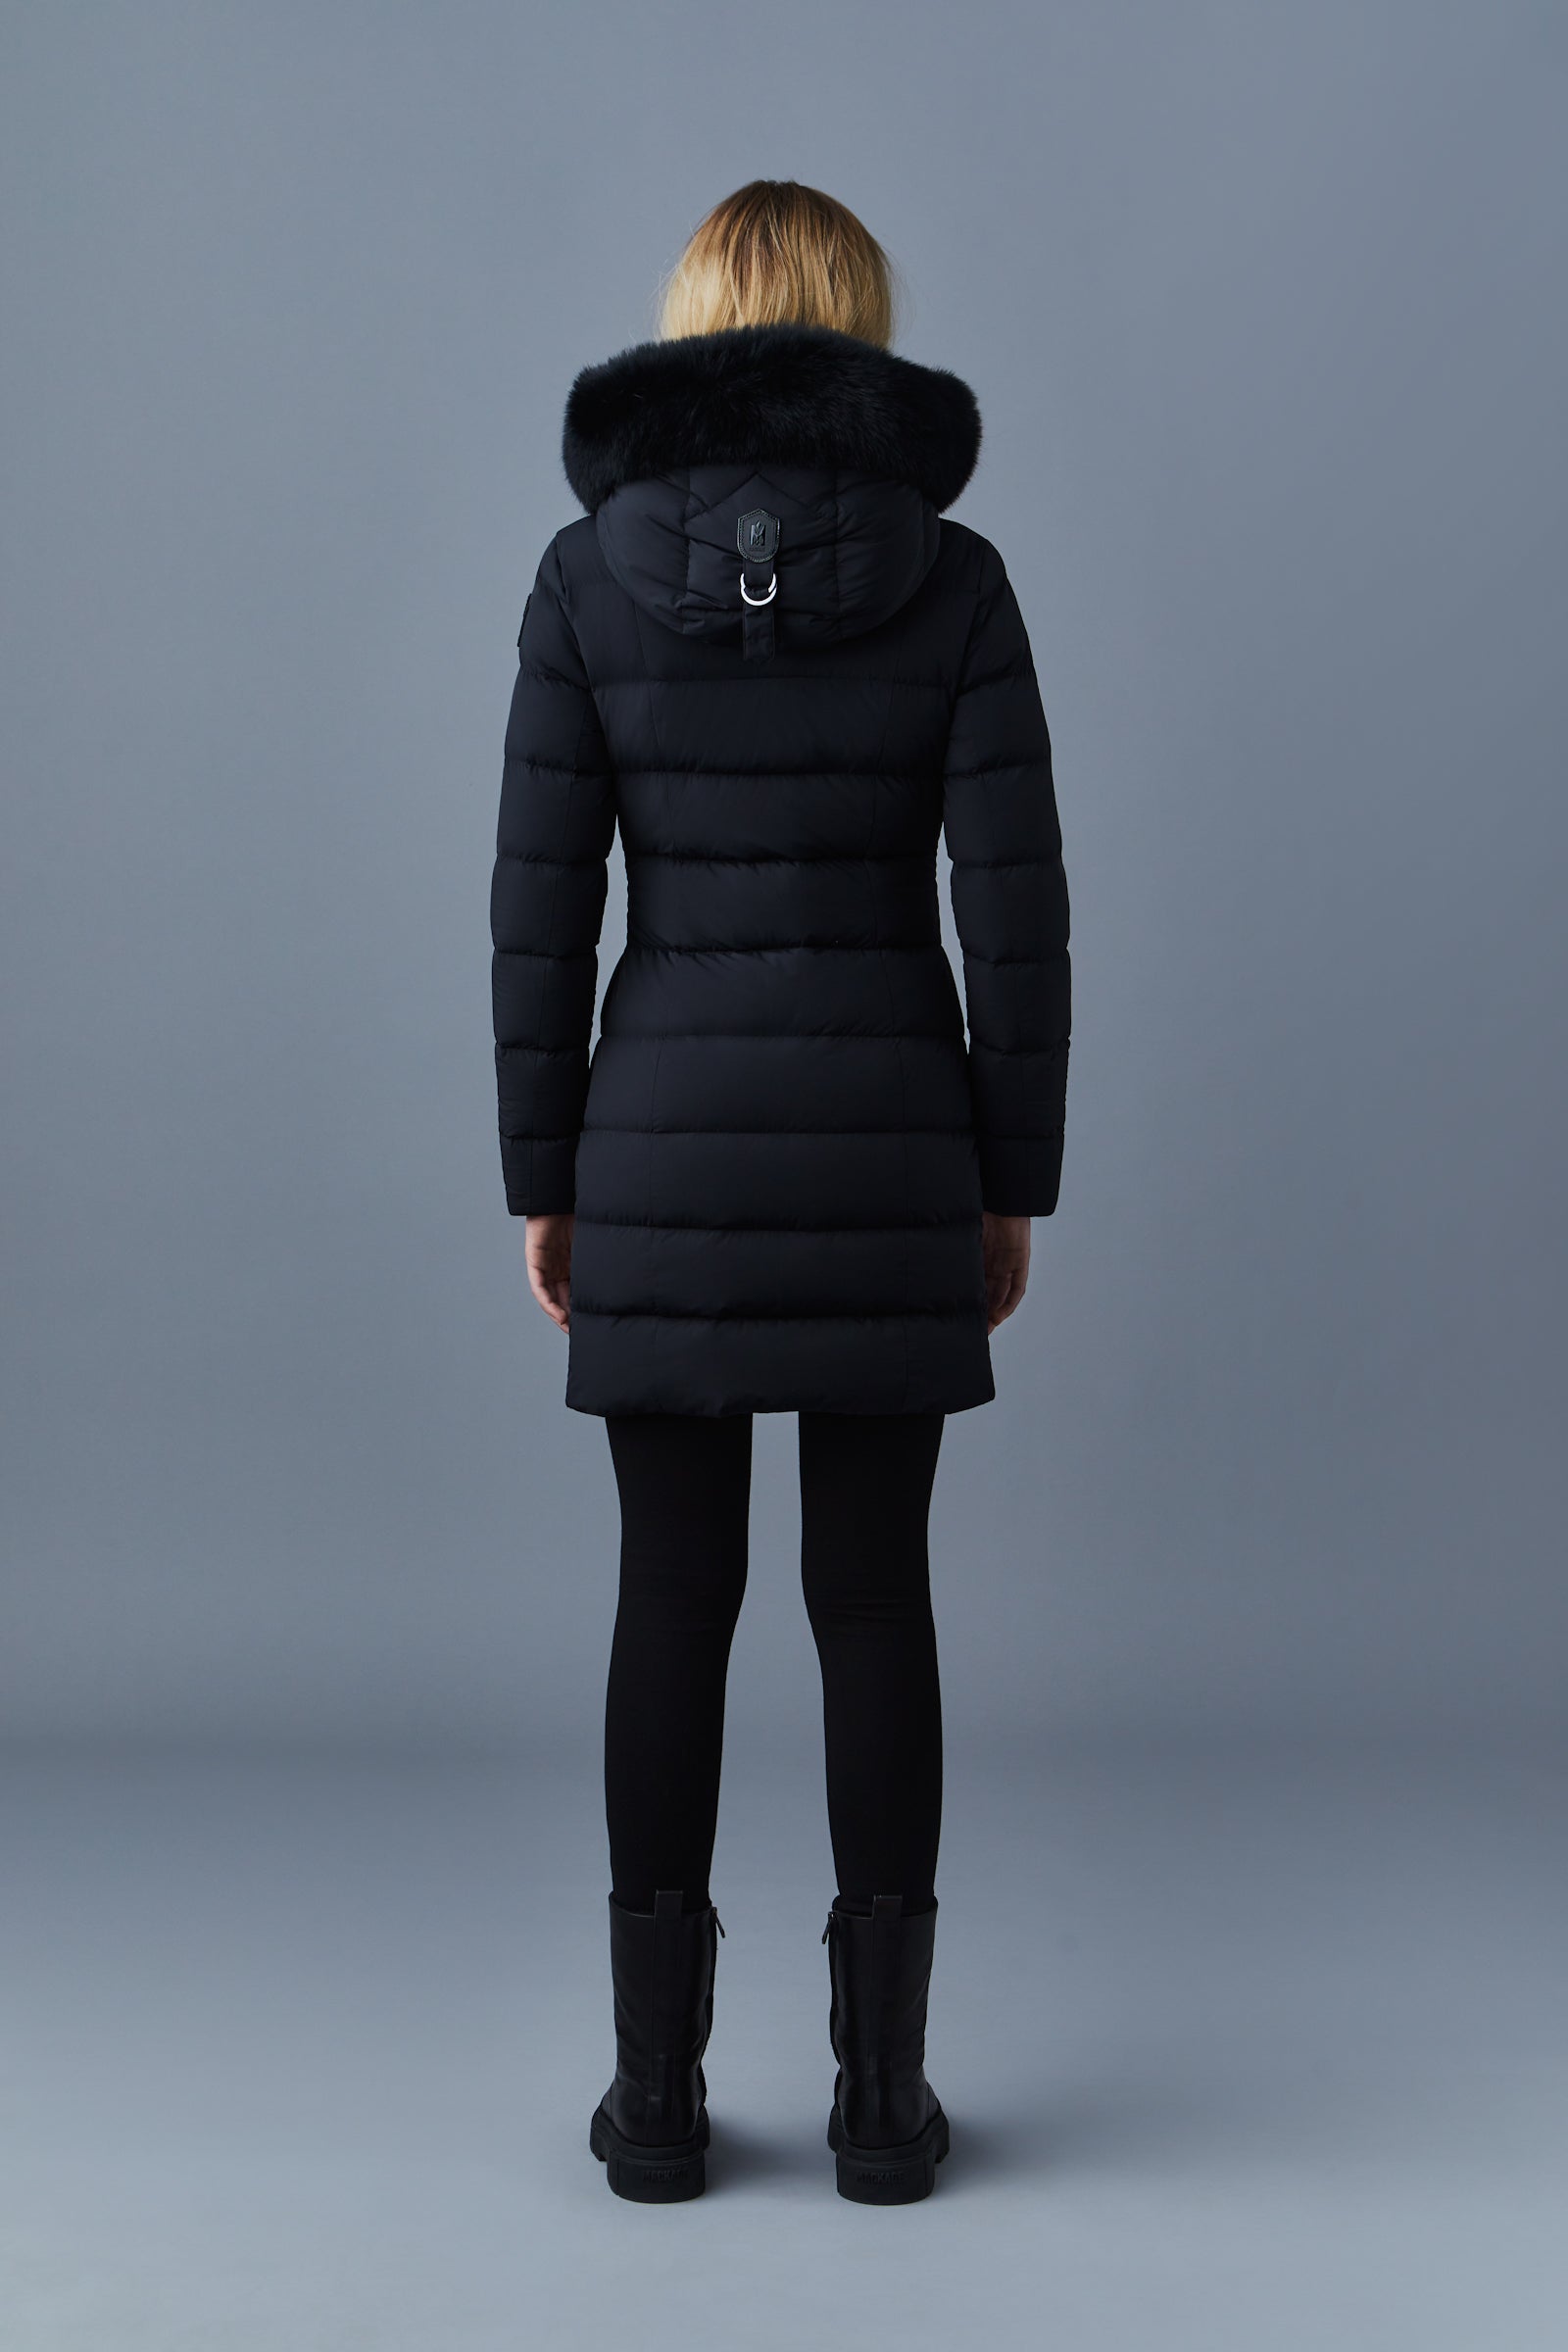 Berry Cocoon Car Coat + Laser Cut Forme Jacket + More - Agent Athletica